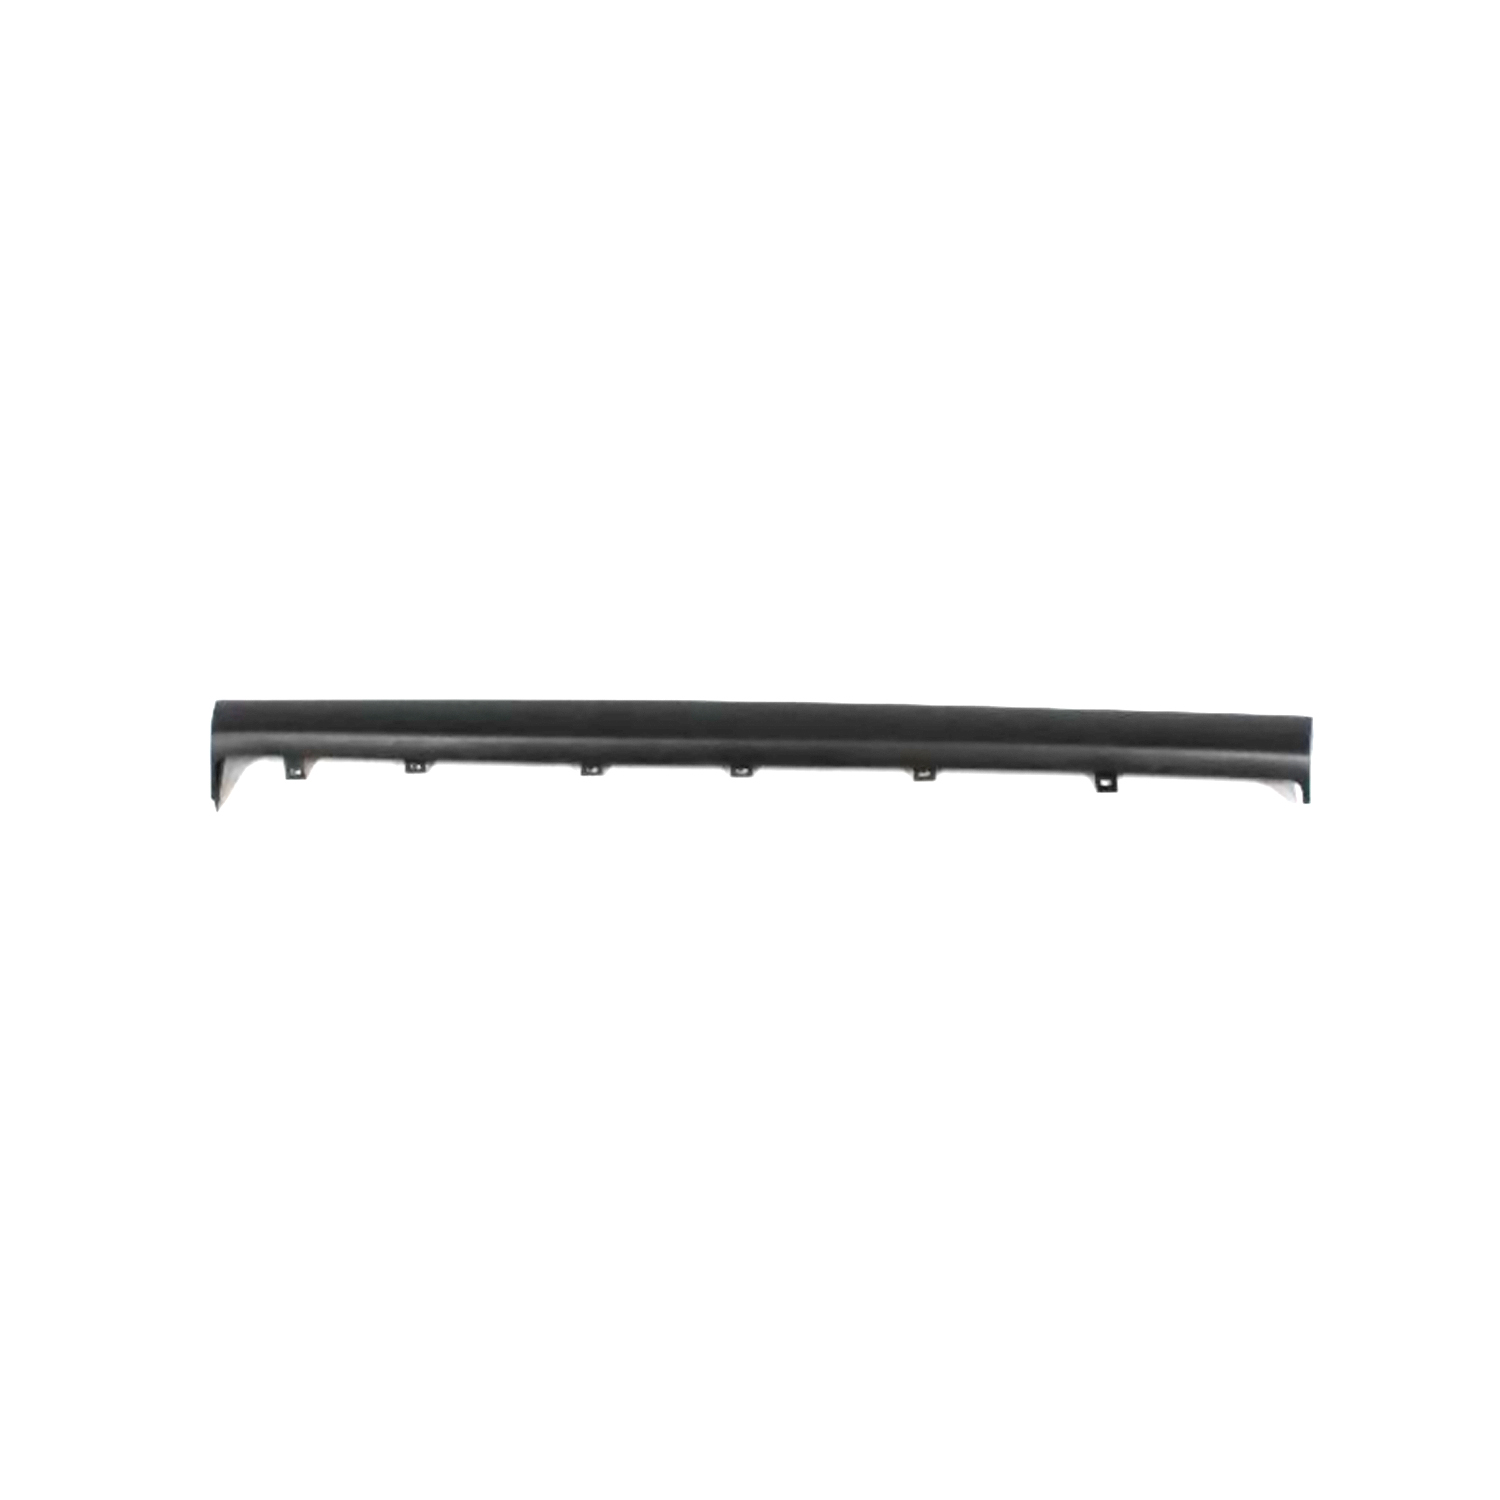 MOLDING SILL COVER